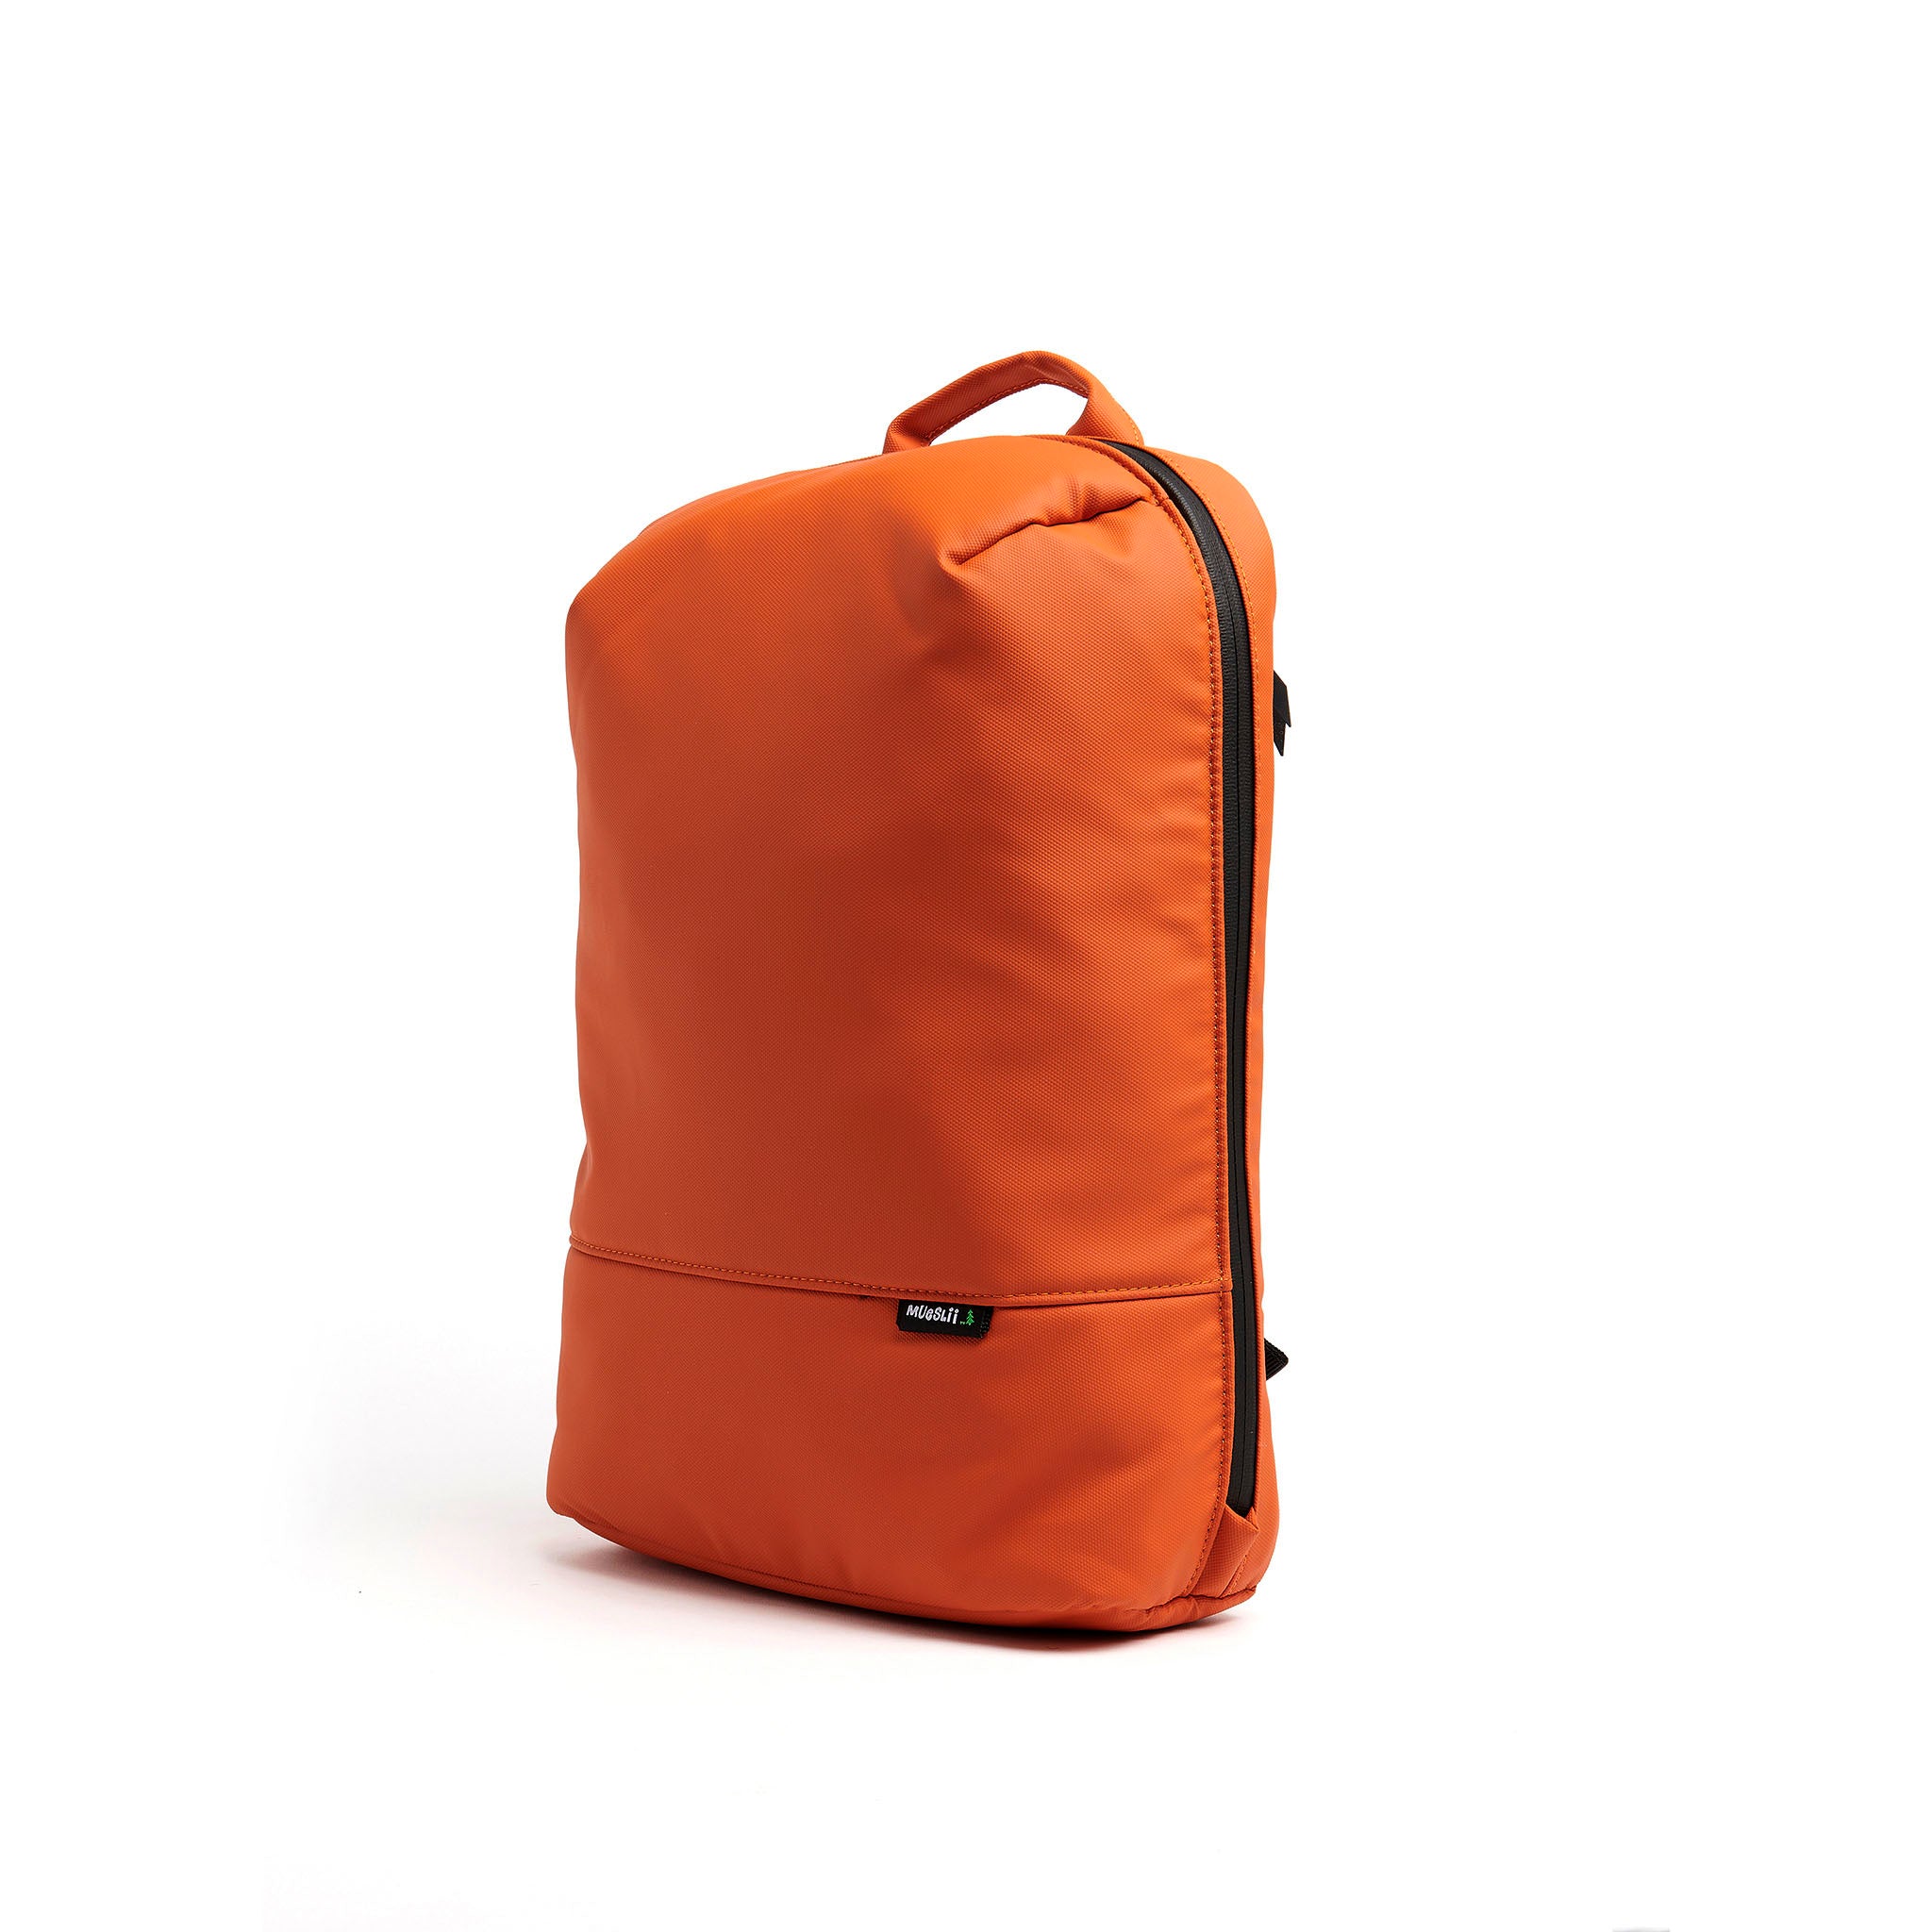 Mueslii daily backpack, made of PU coated waterproof nylon, with a laptop compartment, color orange, side view.